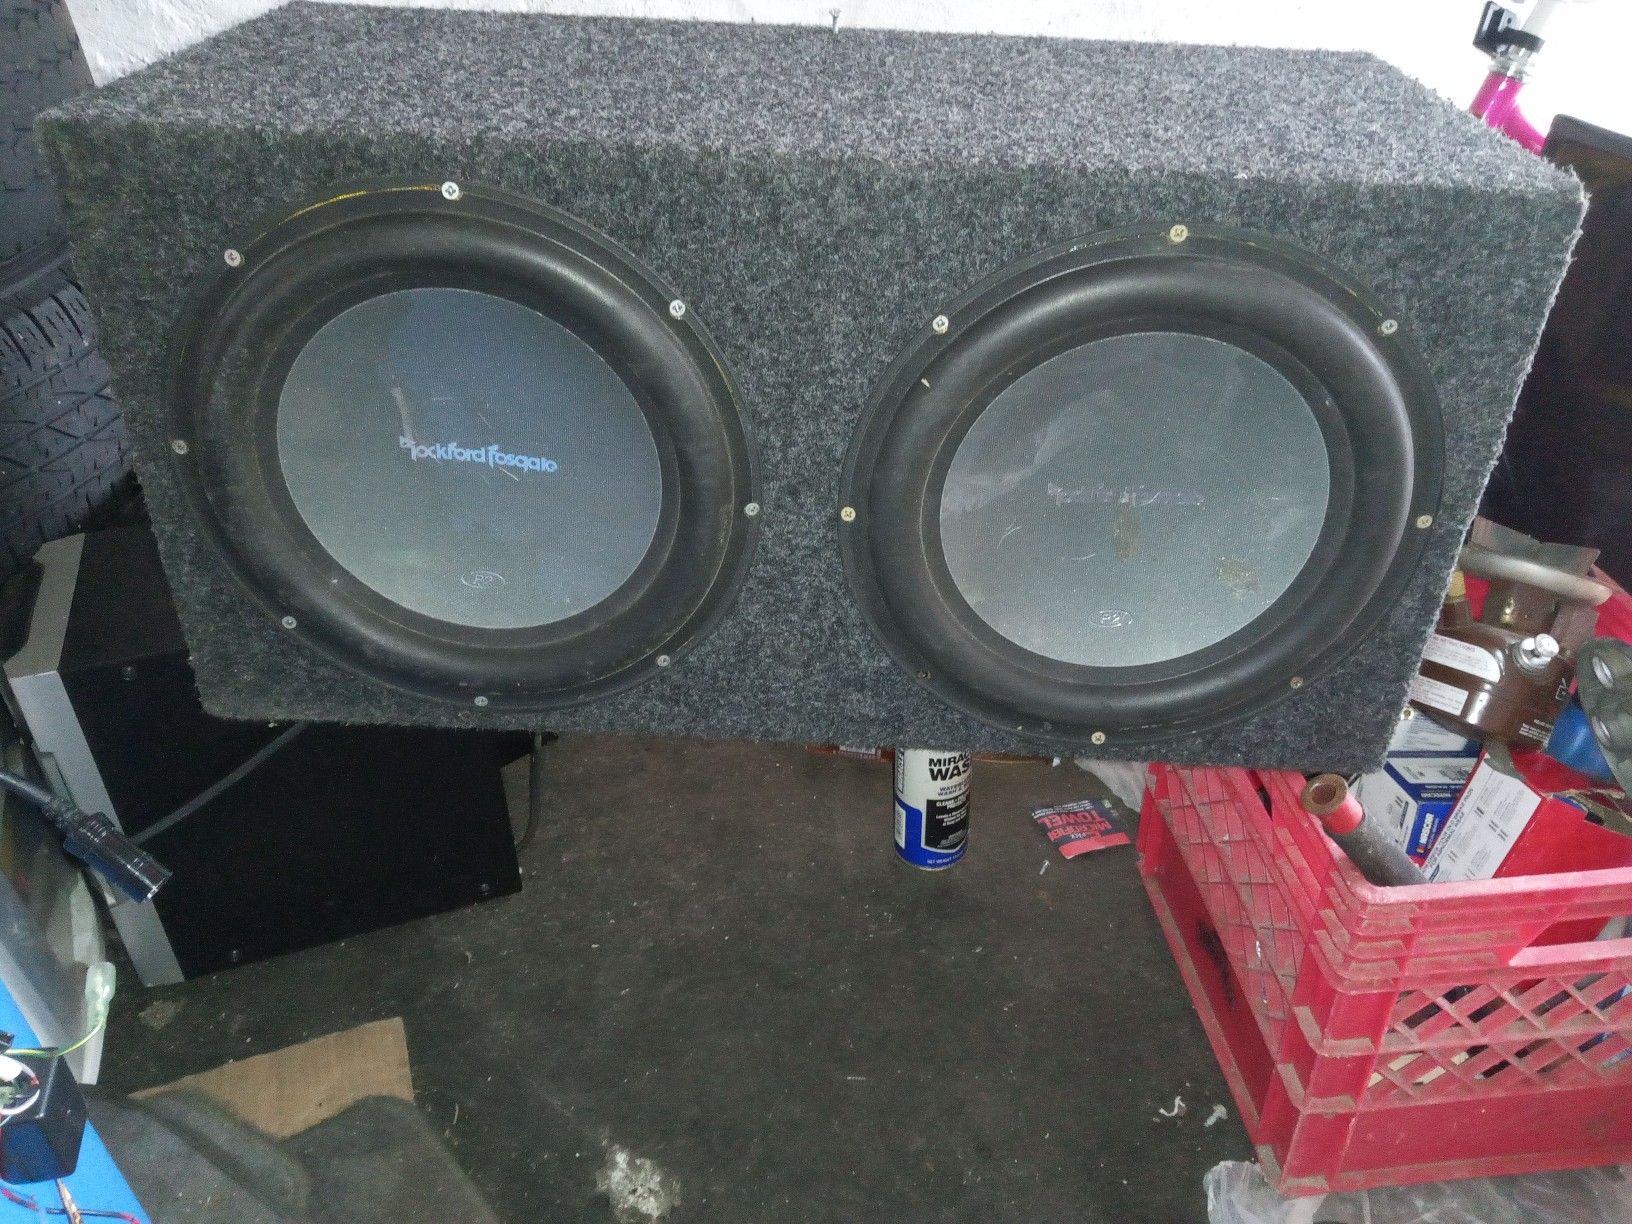 2 12" rockford p2 subwoofers